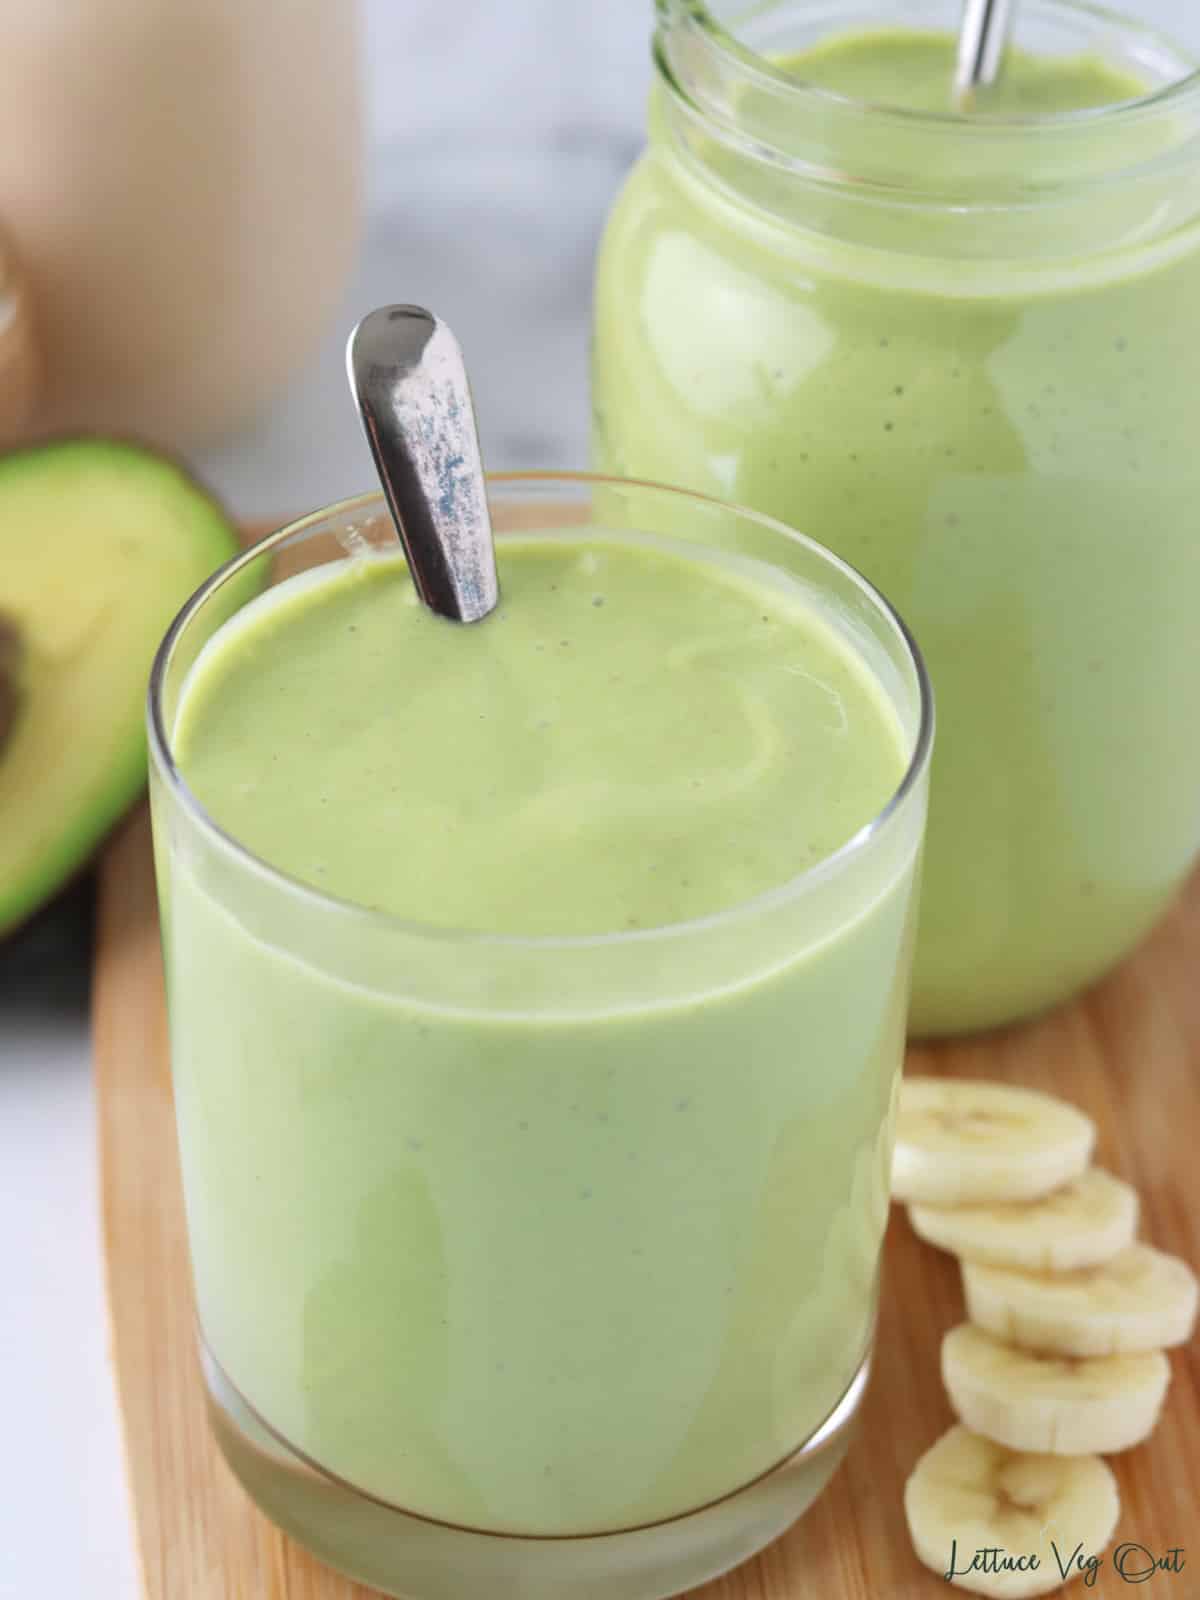 Creamy green smoothie in a glass with a spoon and second glass behind with banana slices garnishing.